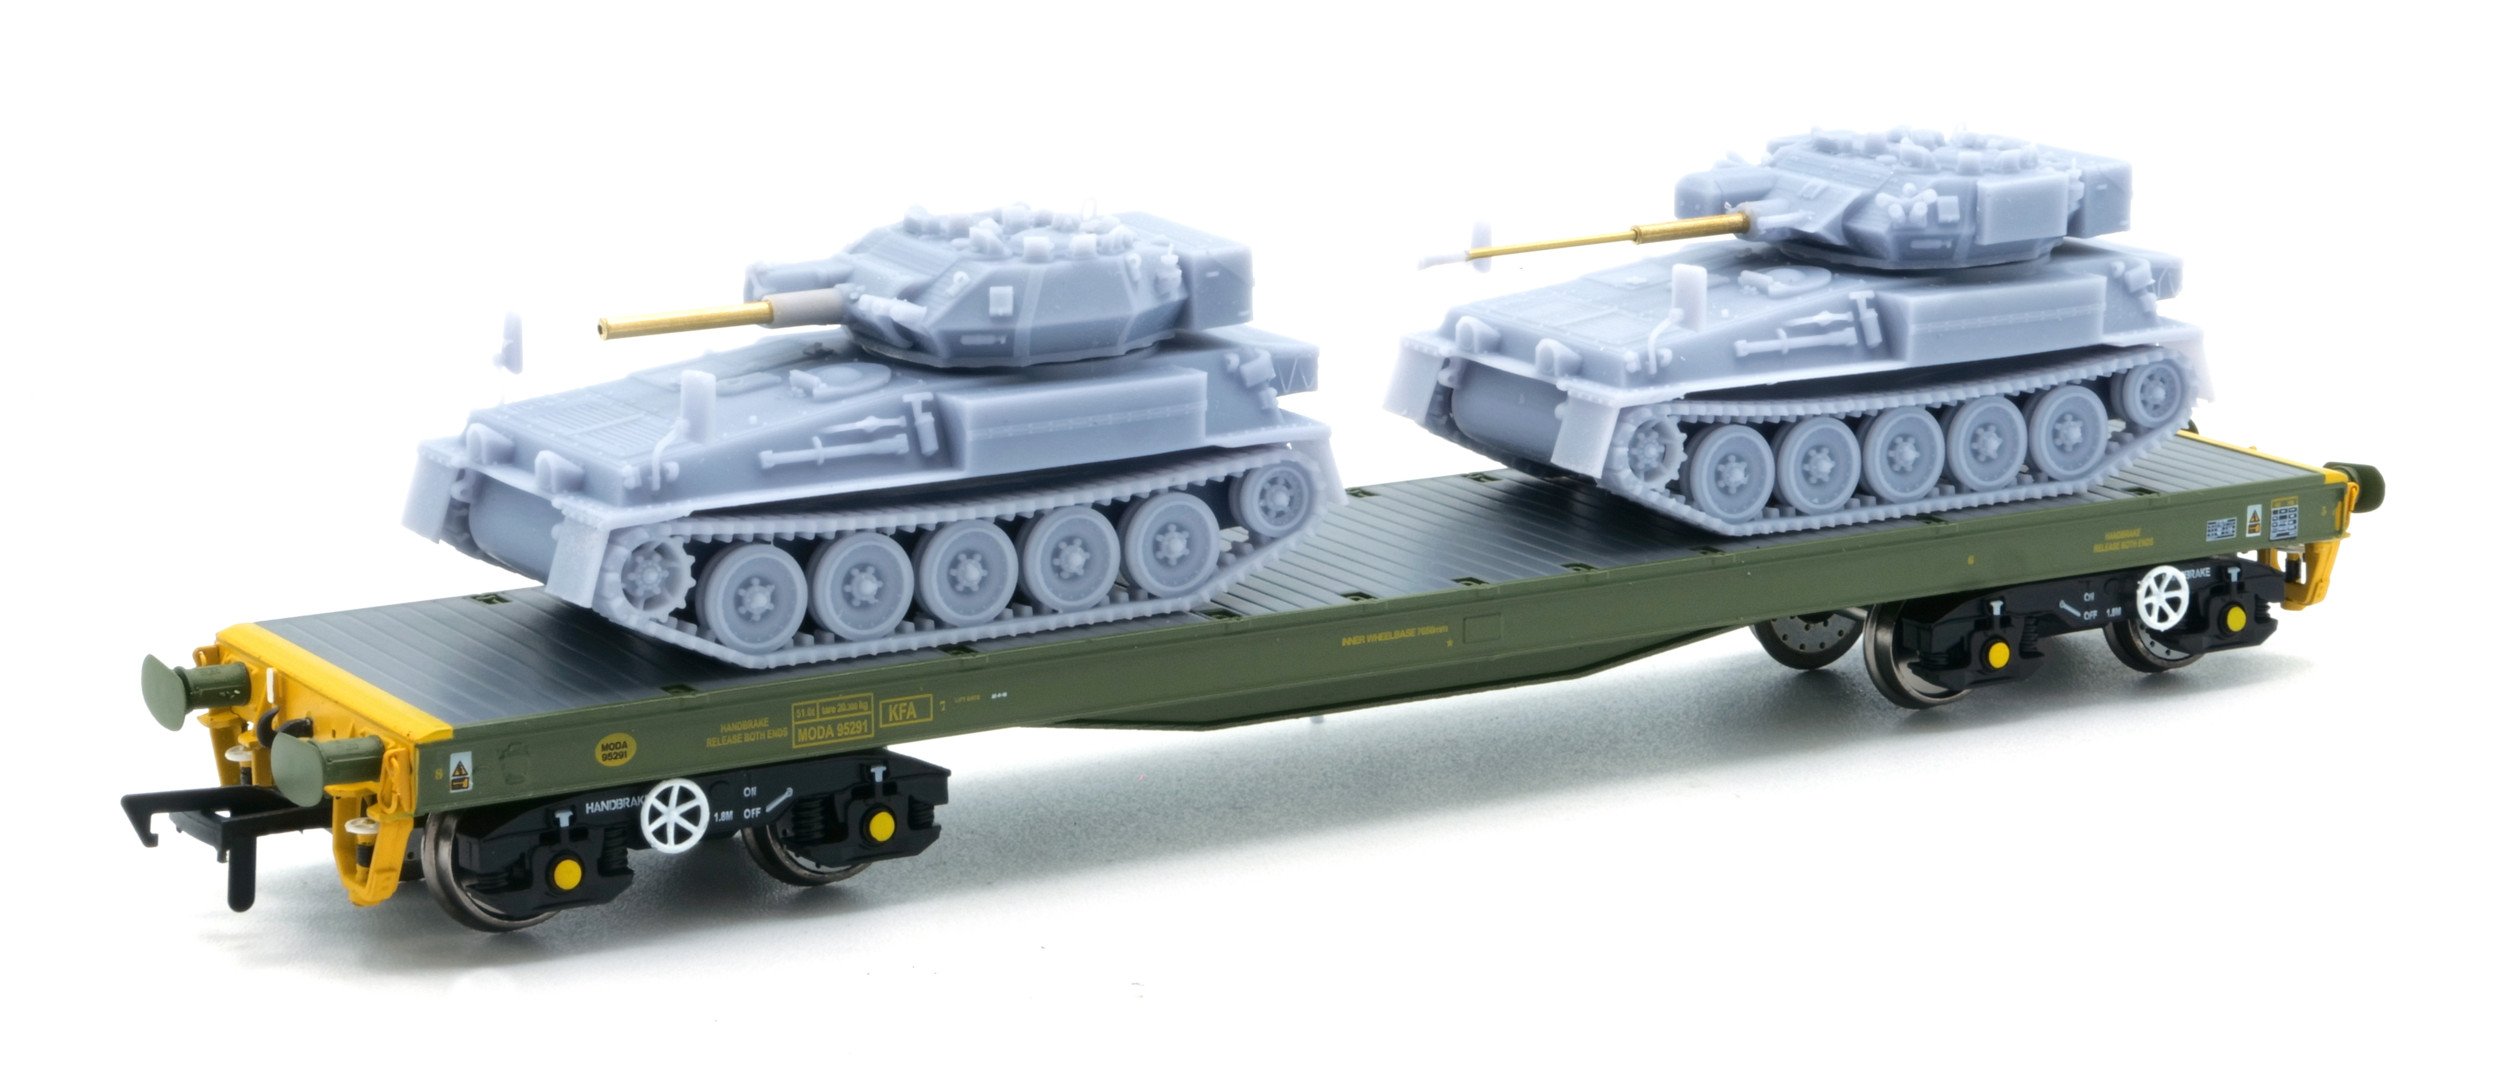 The FV101 Scorpion and FV107 Scimitar make ideal loads for OO gauge military trains.